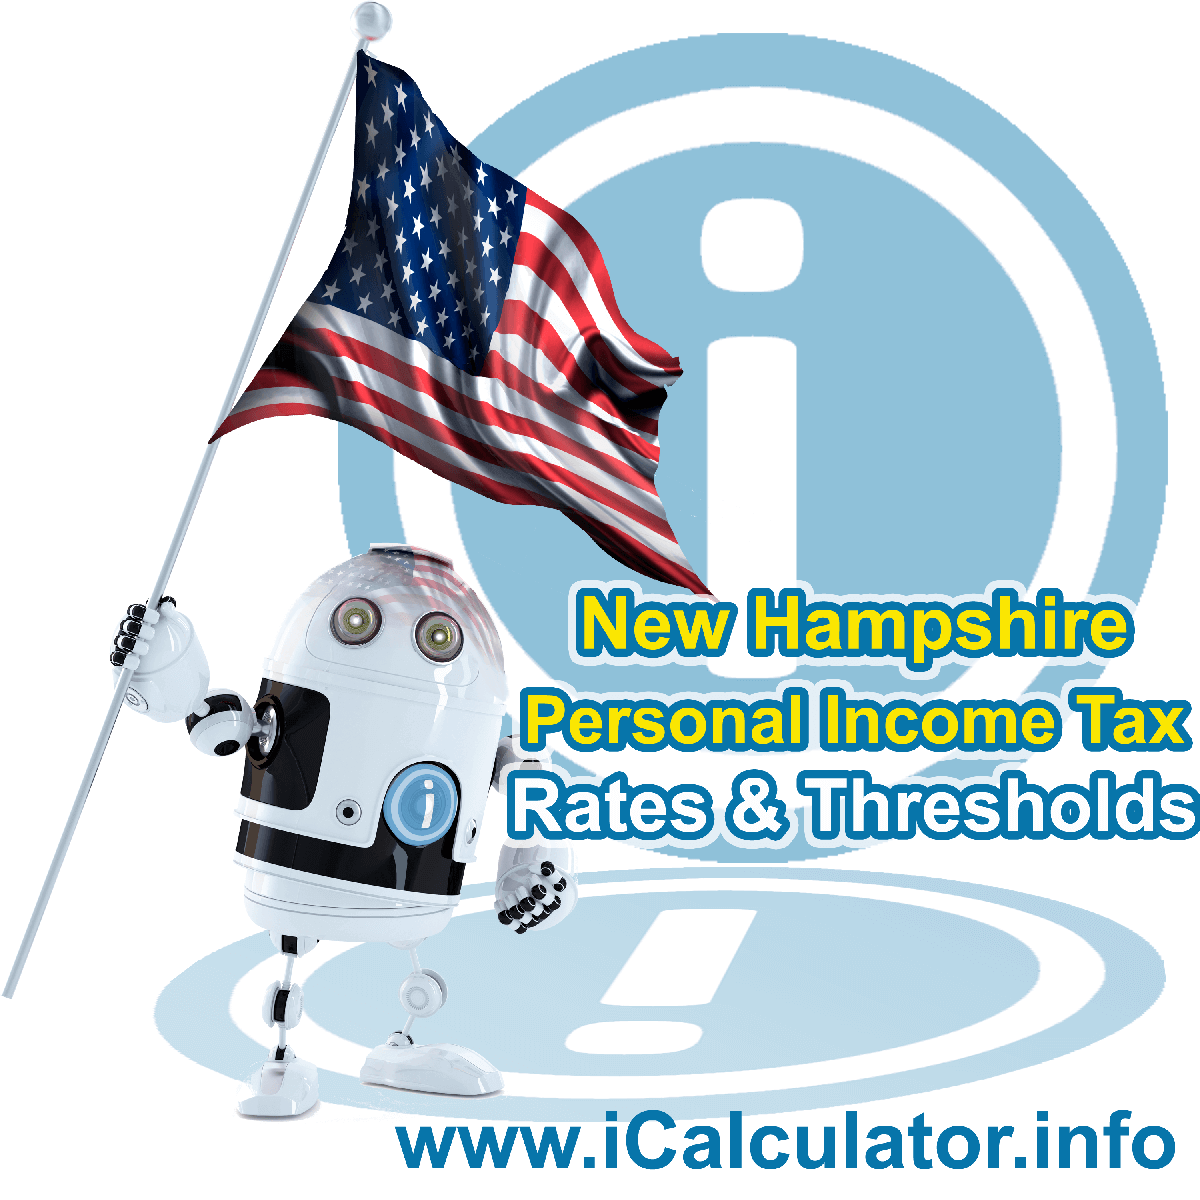 New Hampshire State Tax Tables 2023. This image displays details of the New Hampshire State Tax Tables for the 2023 tax return year which is provided in support of the 2023 US Tax Calculator